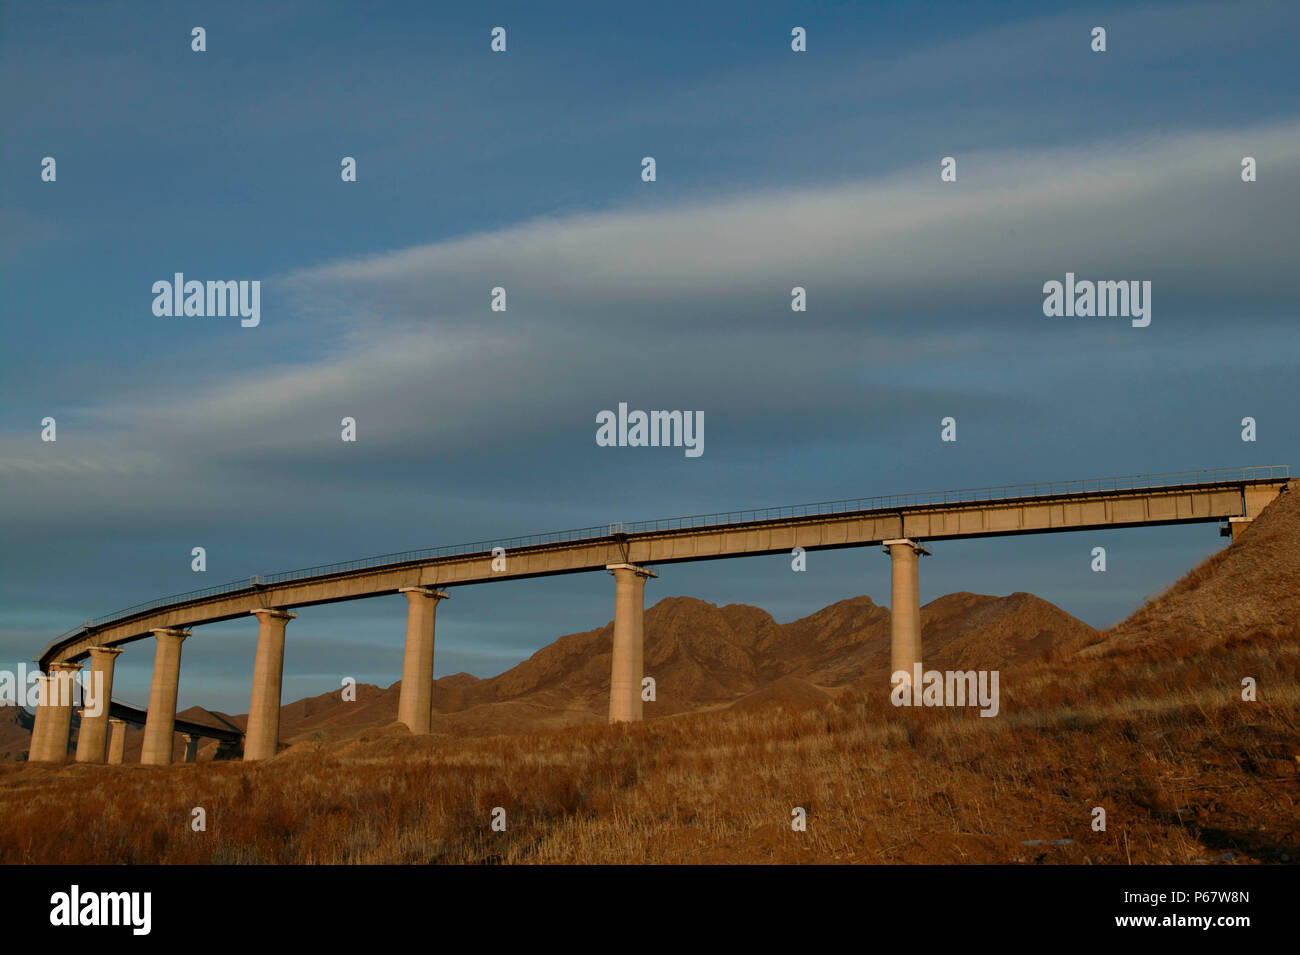 The fabled curved viaduct at Simingyi on the Jing Peng section of the Ji-Tong Railway in Inner Mongolia was one of the worlds finest photographic loca Stock Photo